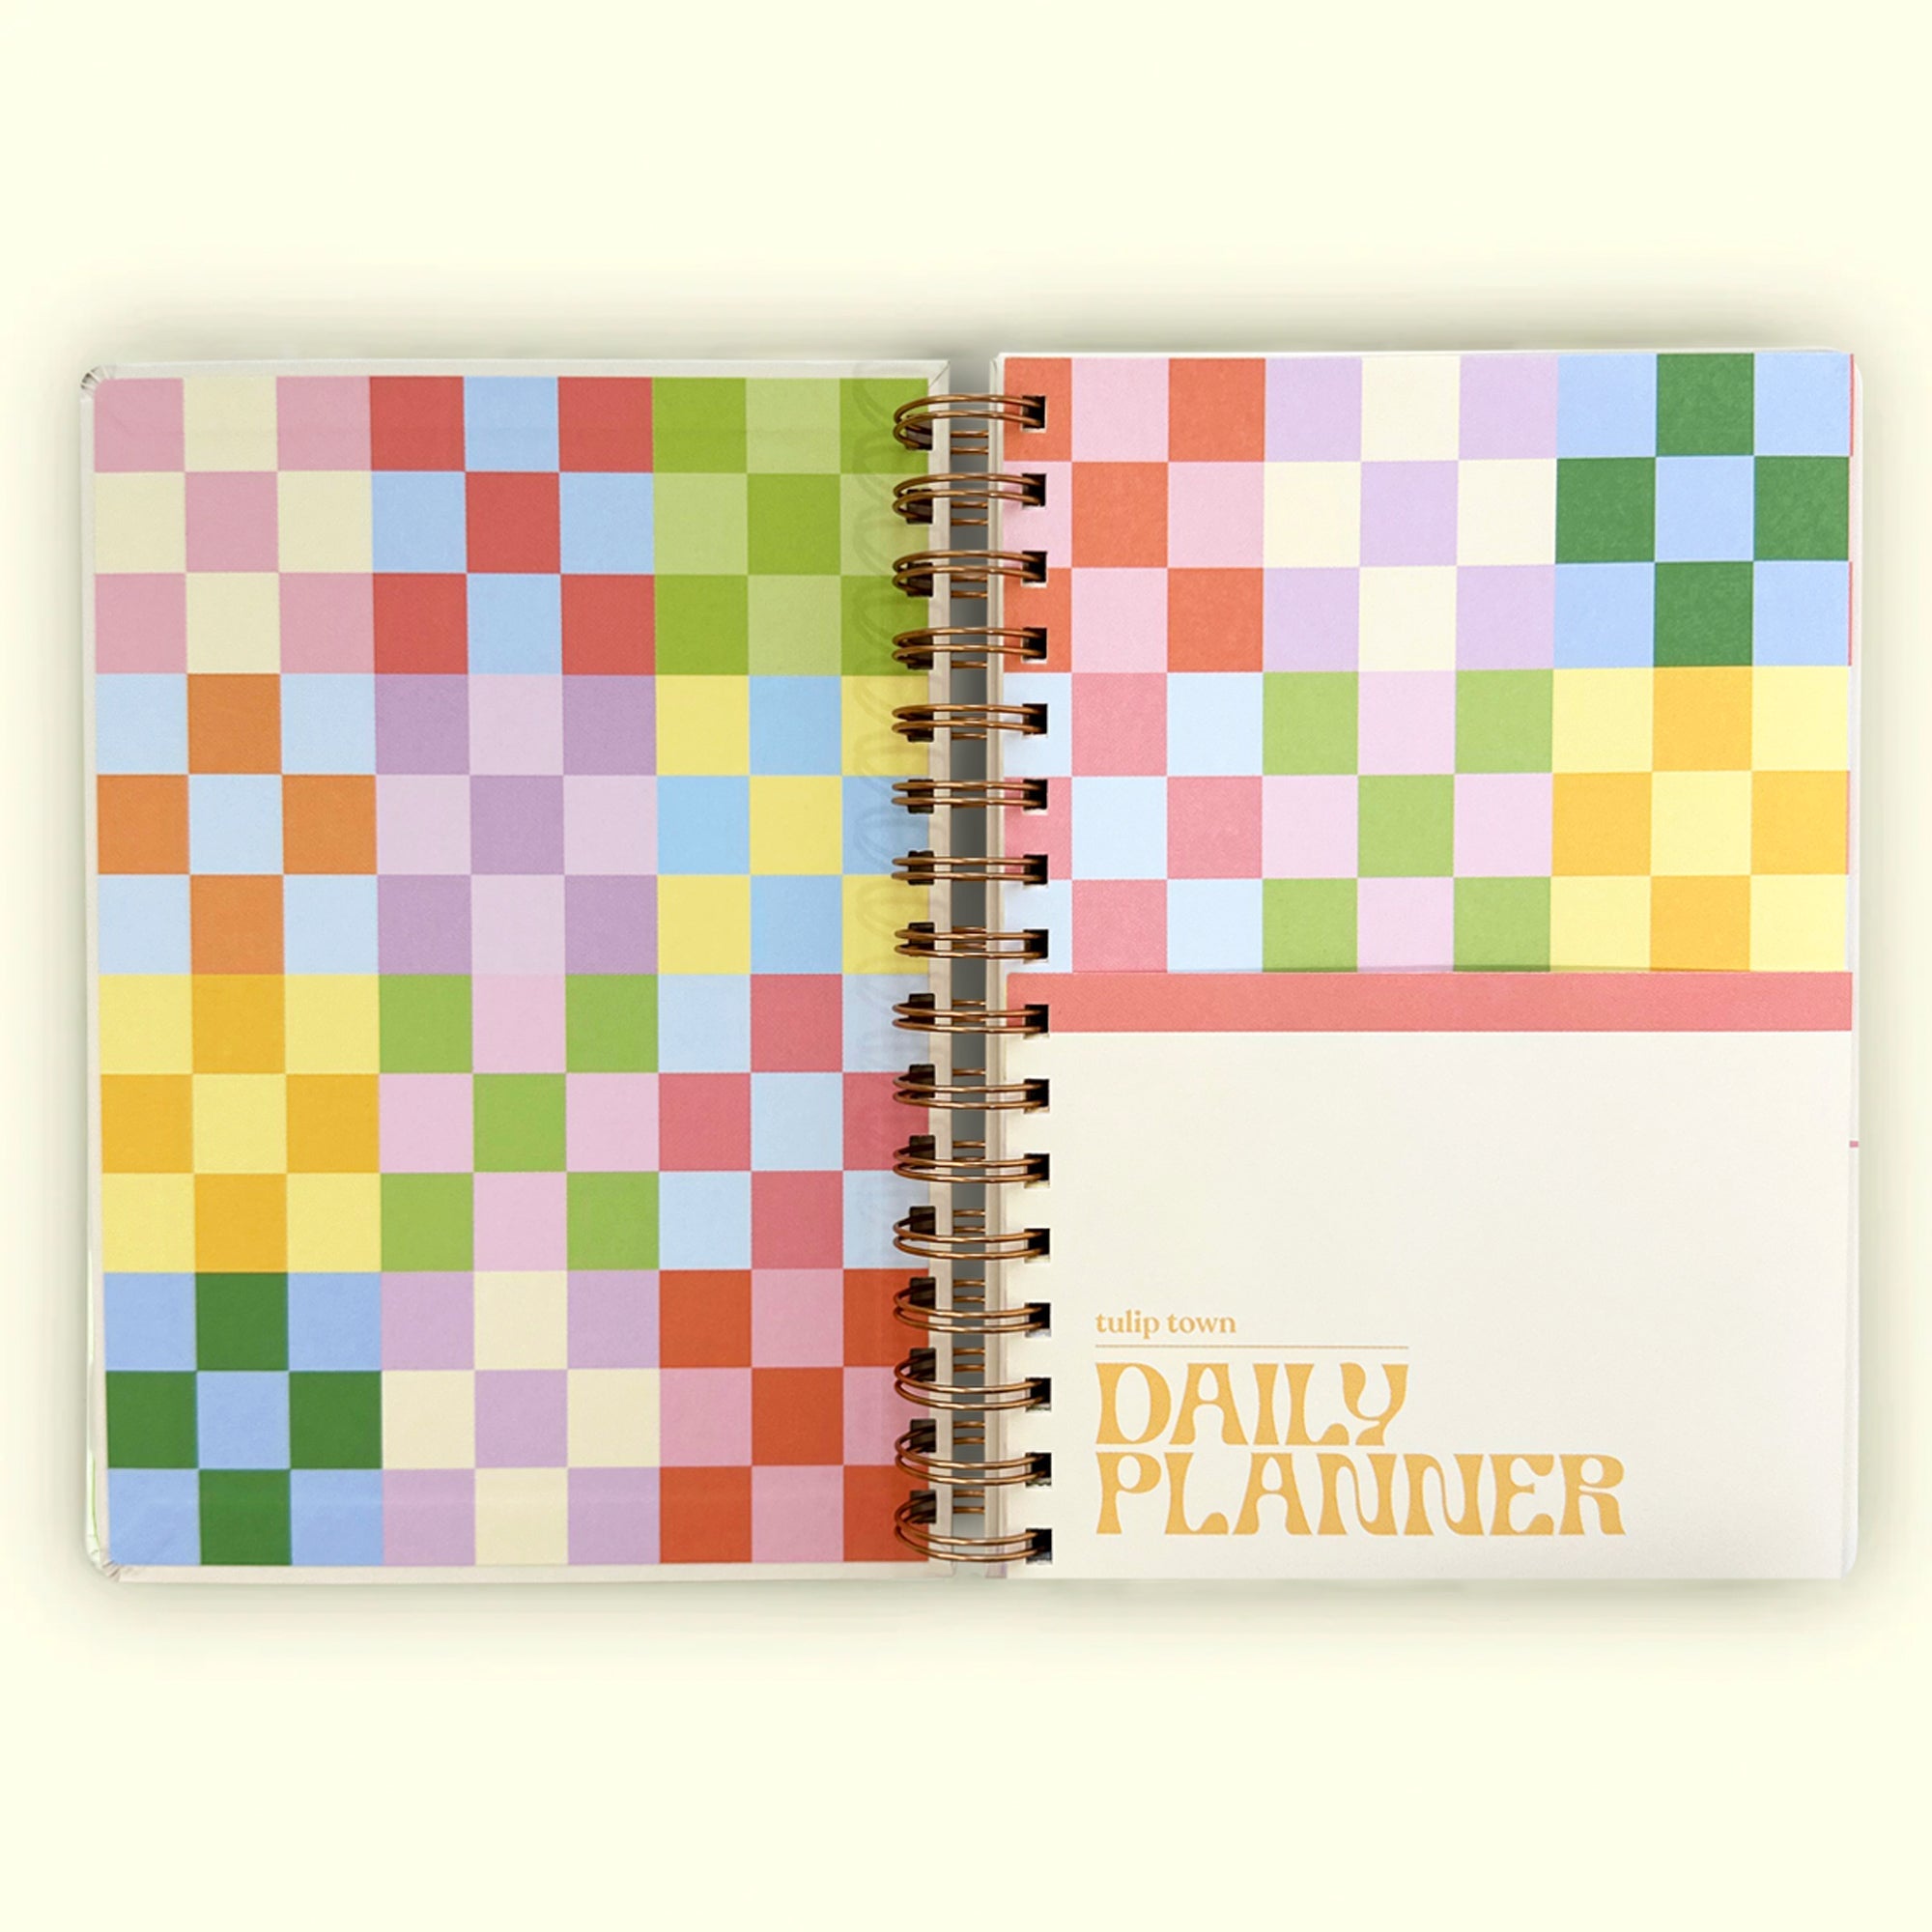 Daily Planner | Tulip Town